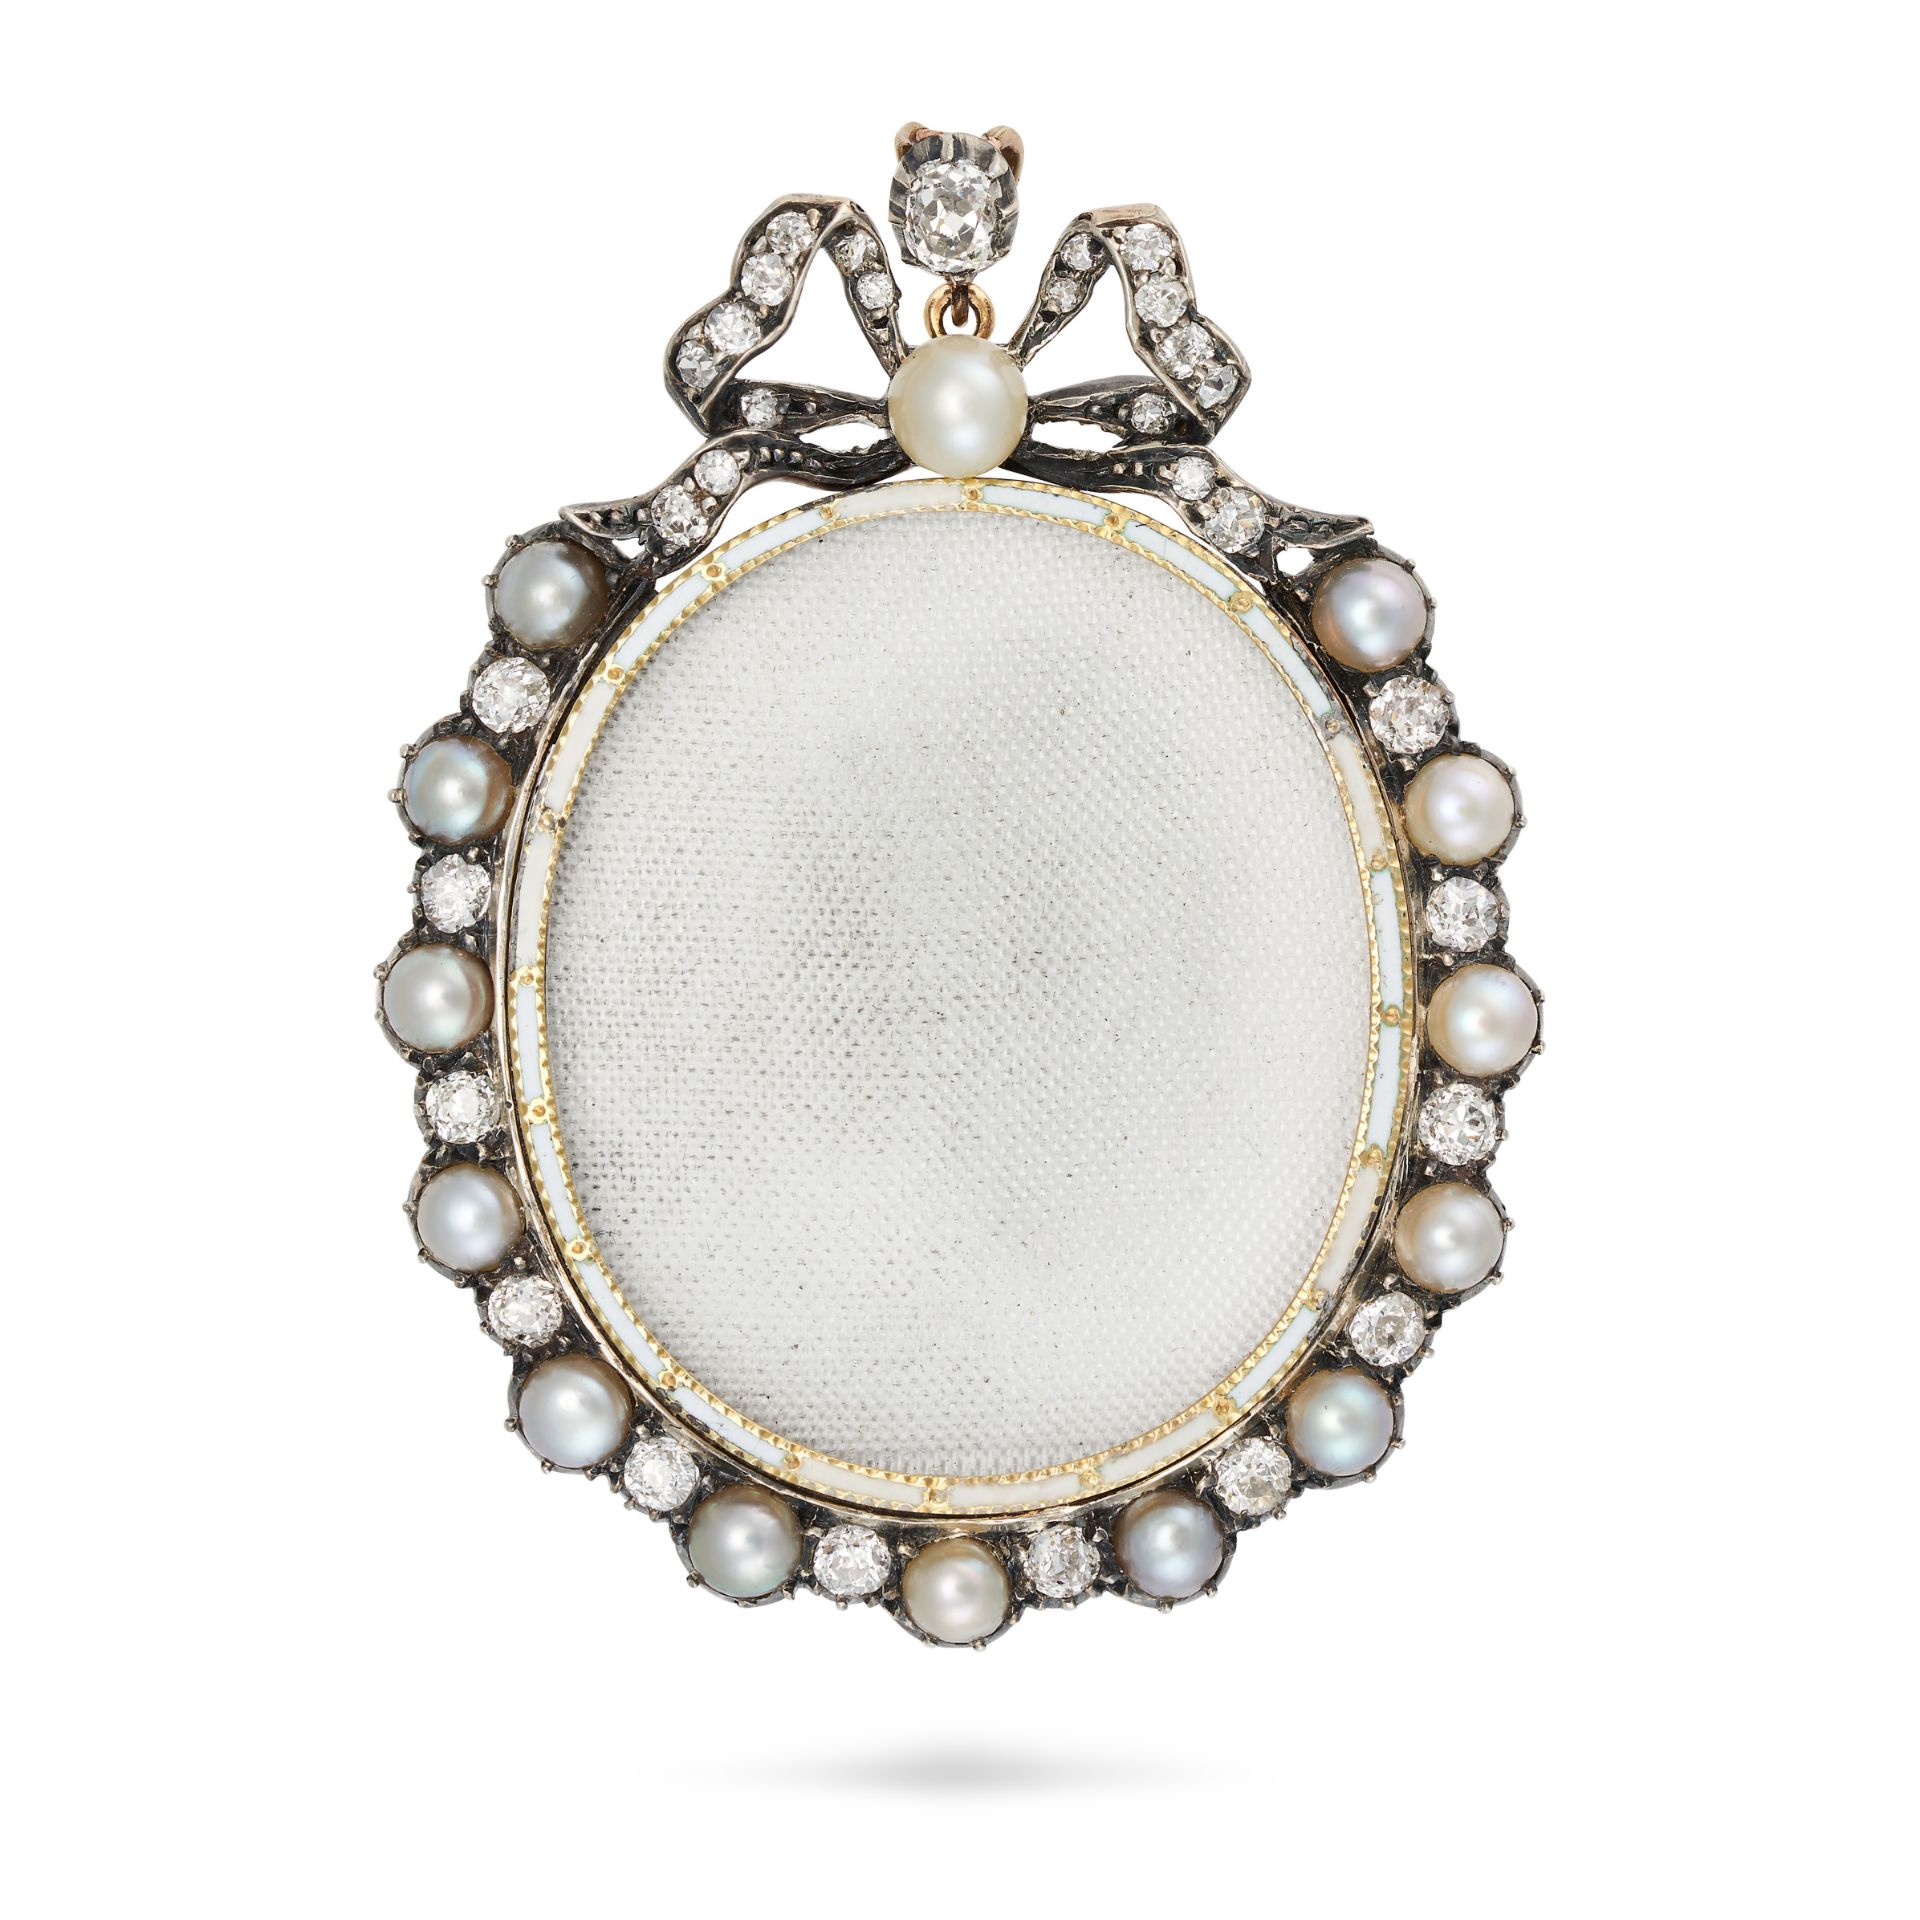 AN ANTIQUE VICTORIAN DIAMOND, PEARL AND ENAMEL LOCKET PENDANT in yellow gold and silver, comprisi...